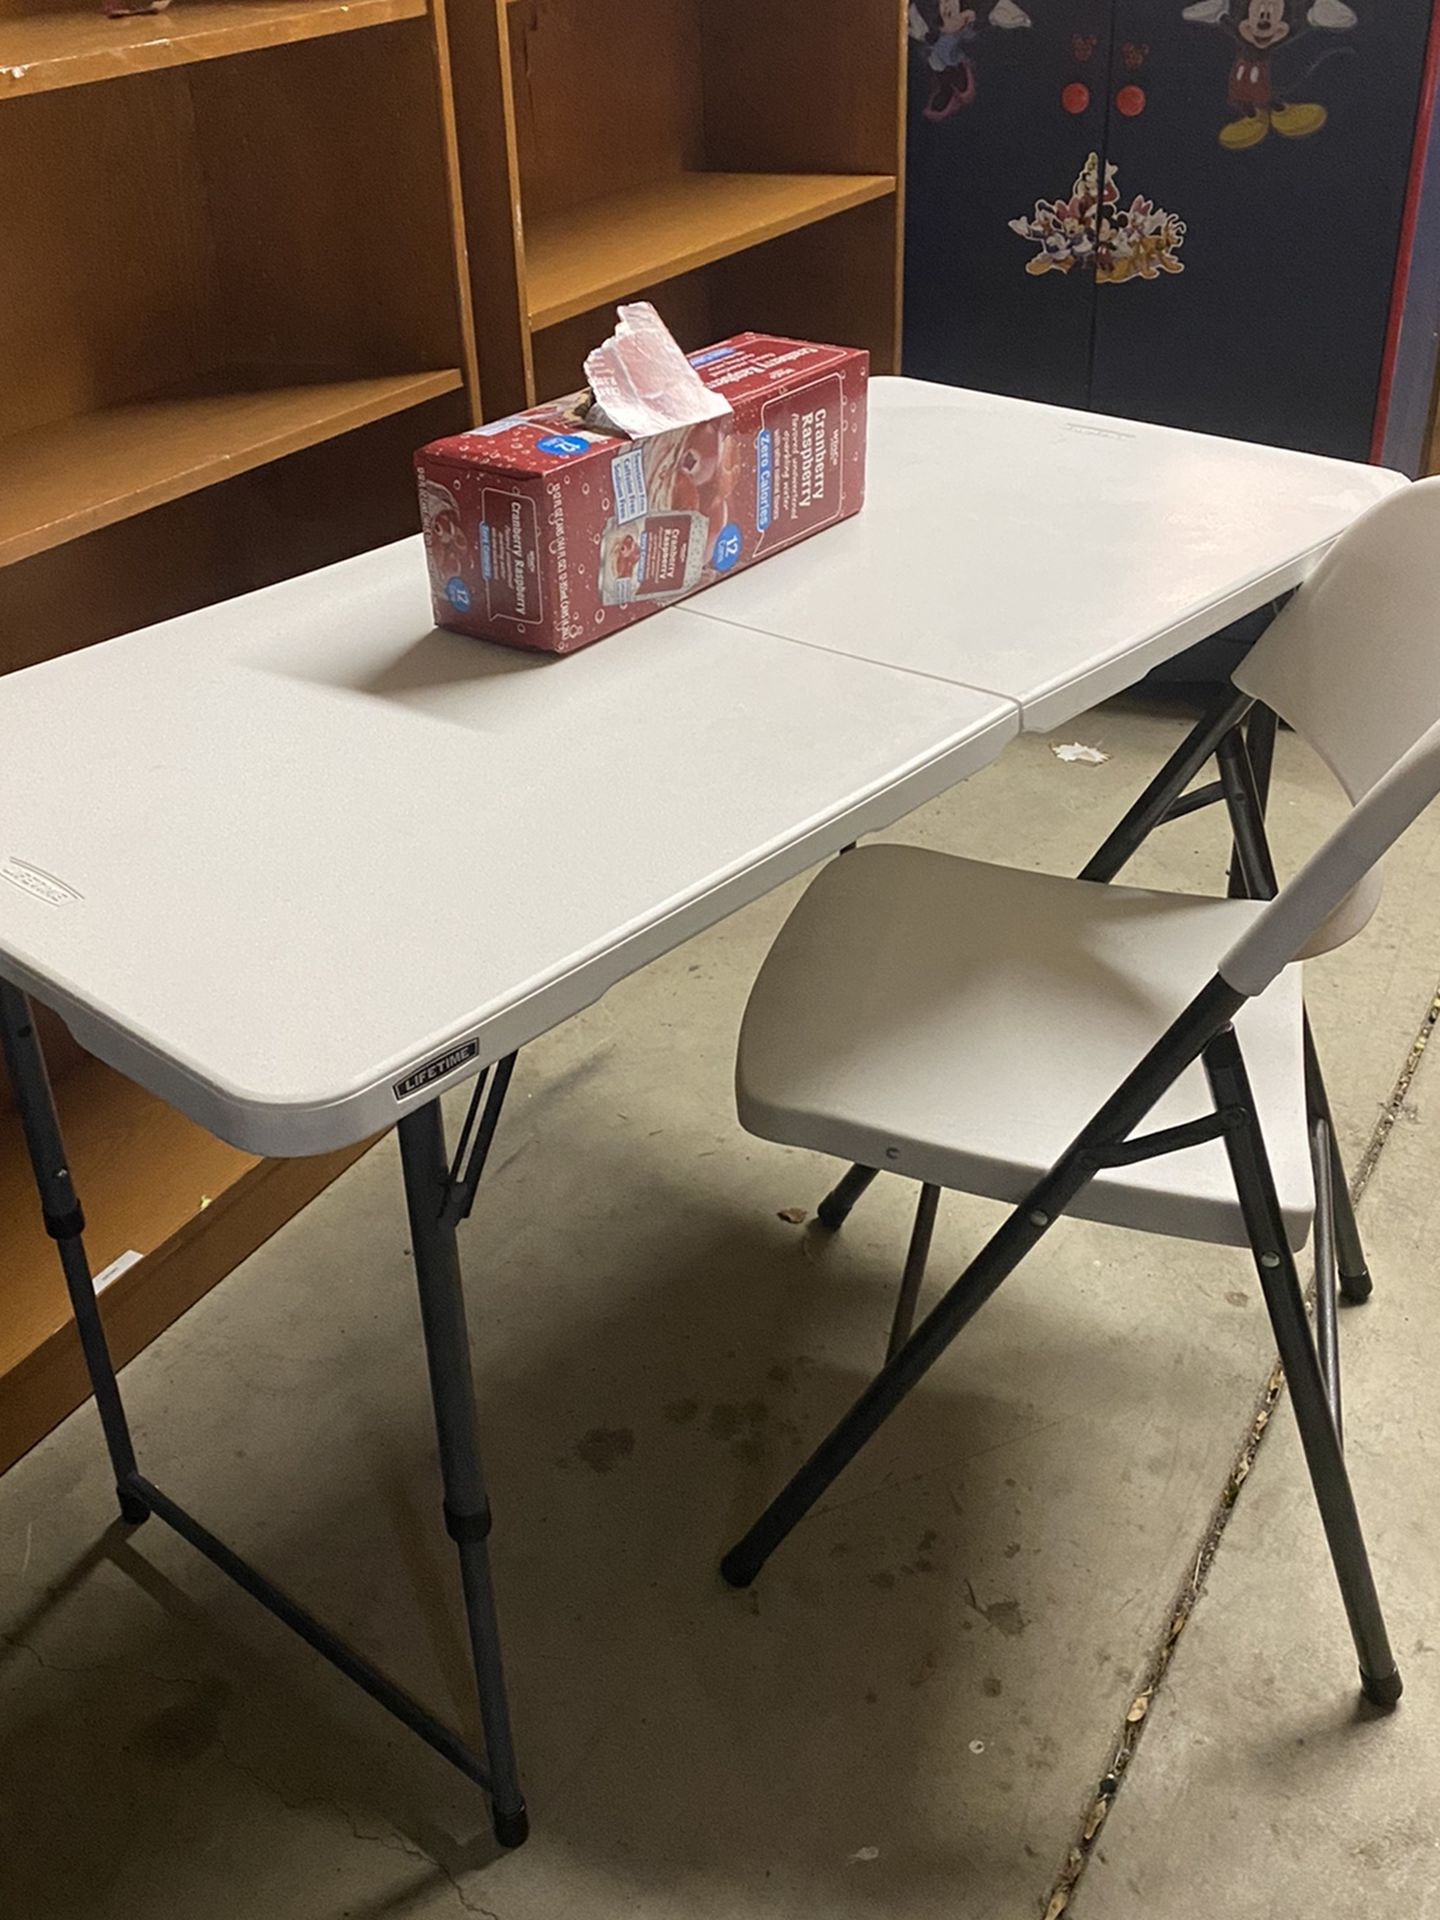 $80-(firm on price)-Lifetime Height Adjustable Craft, Camping and Utility Folding Table, 4 ft X 2' /48 x 24, White (height is adjustable)- used for ex